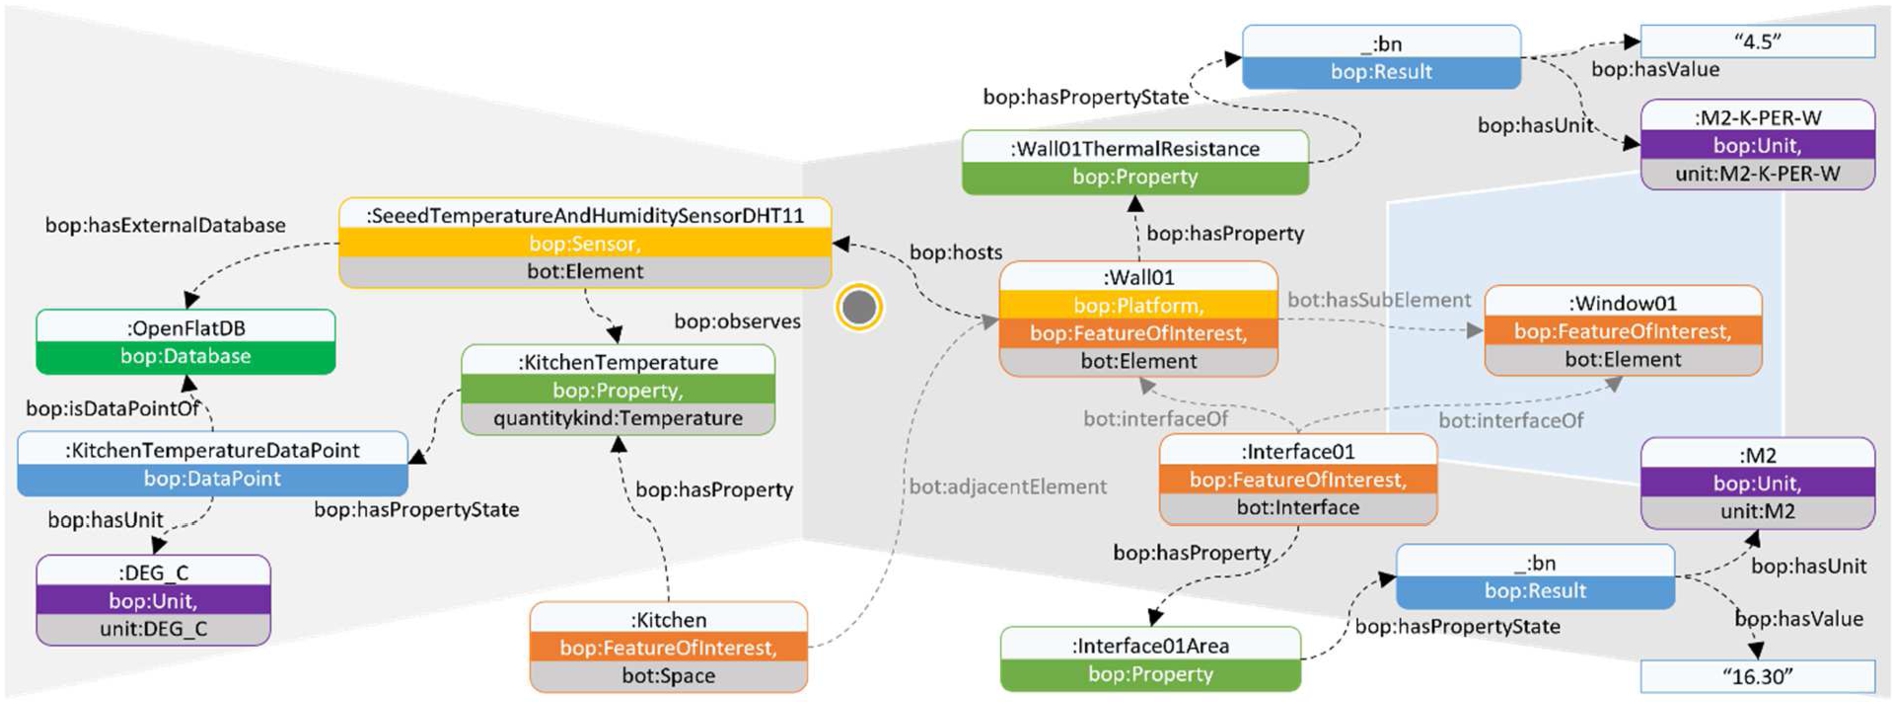 Turtle representation of the OpenFlat using the BOP and BOT ontologies.